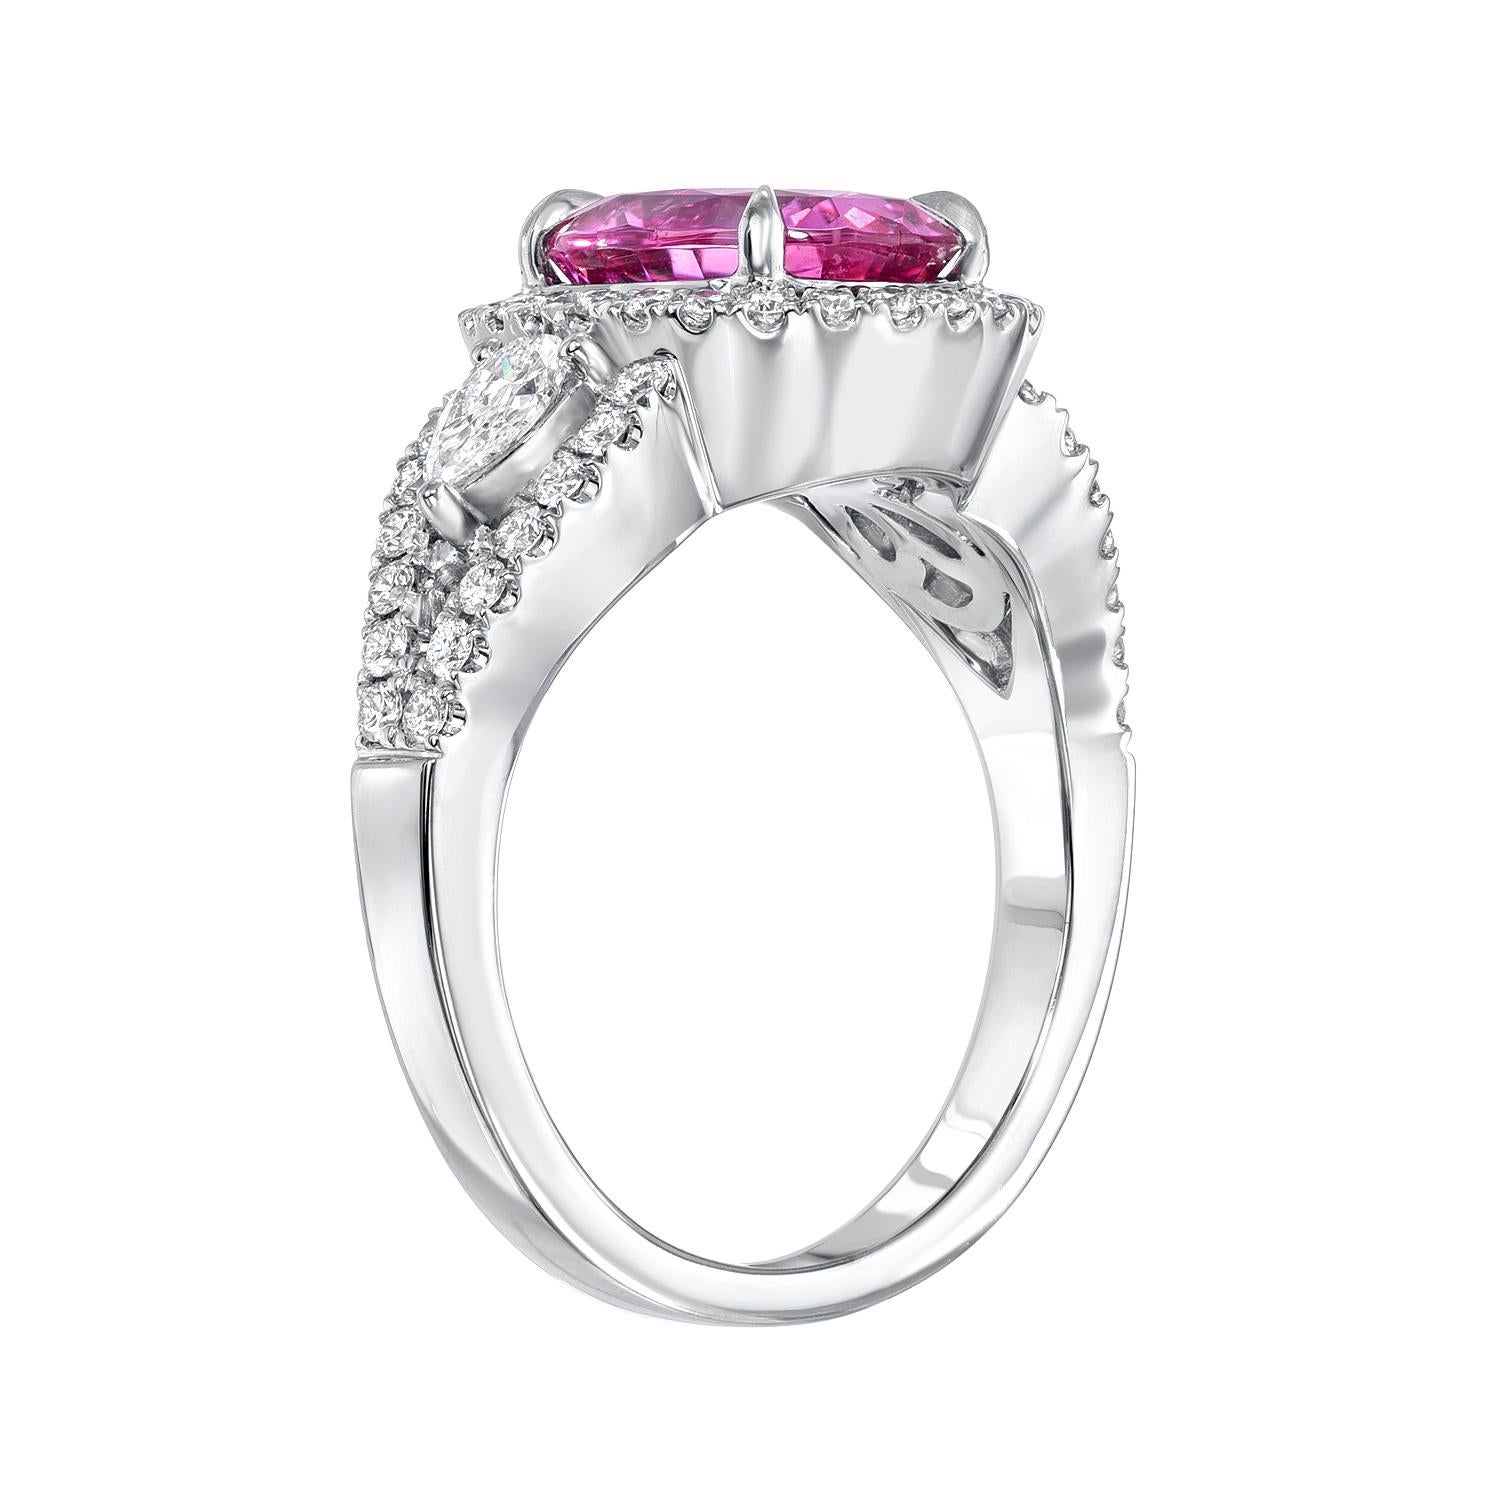 Vibrant 3.07 carat Pink Sapphire oval, 18K white gold ring, flanked by a pair of pear shape diamonds, surrounded by round brilliant diamonds weighing a total of 0.78 carats.
Ring size 6.5. Resizing is complementary upon request.
Crafted by extremely